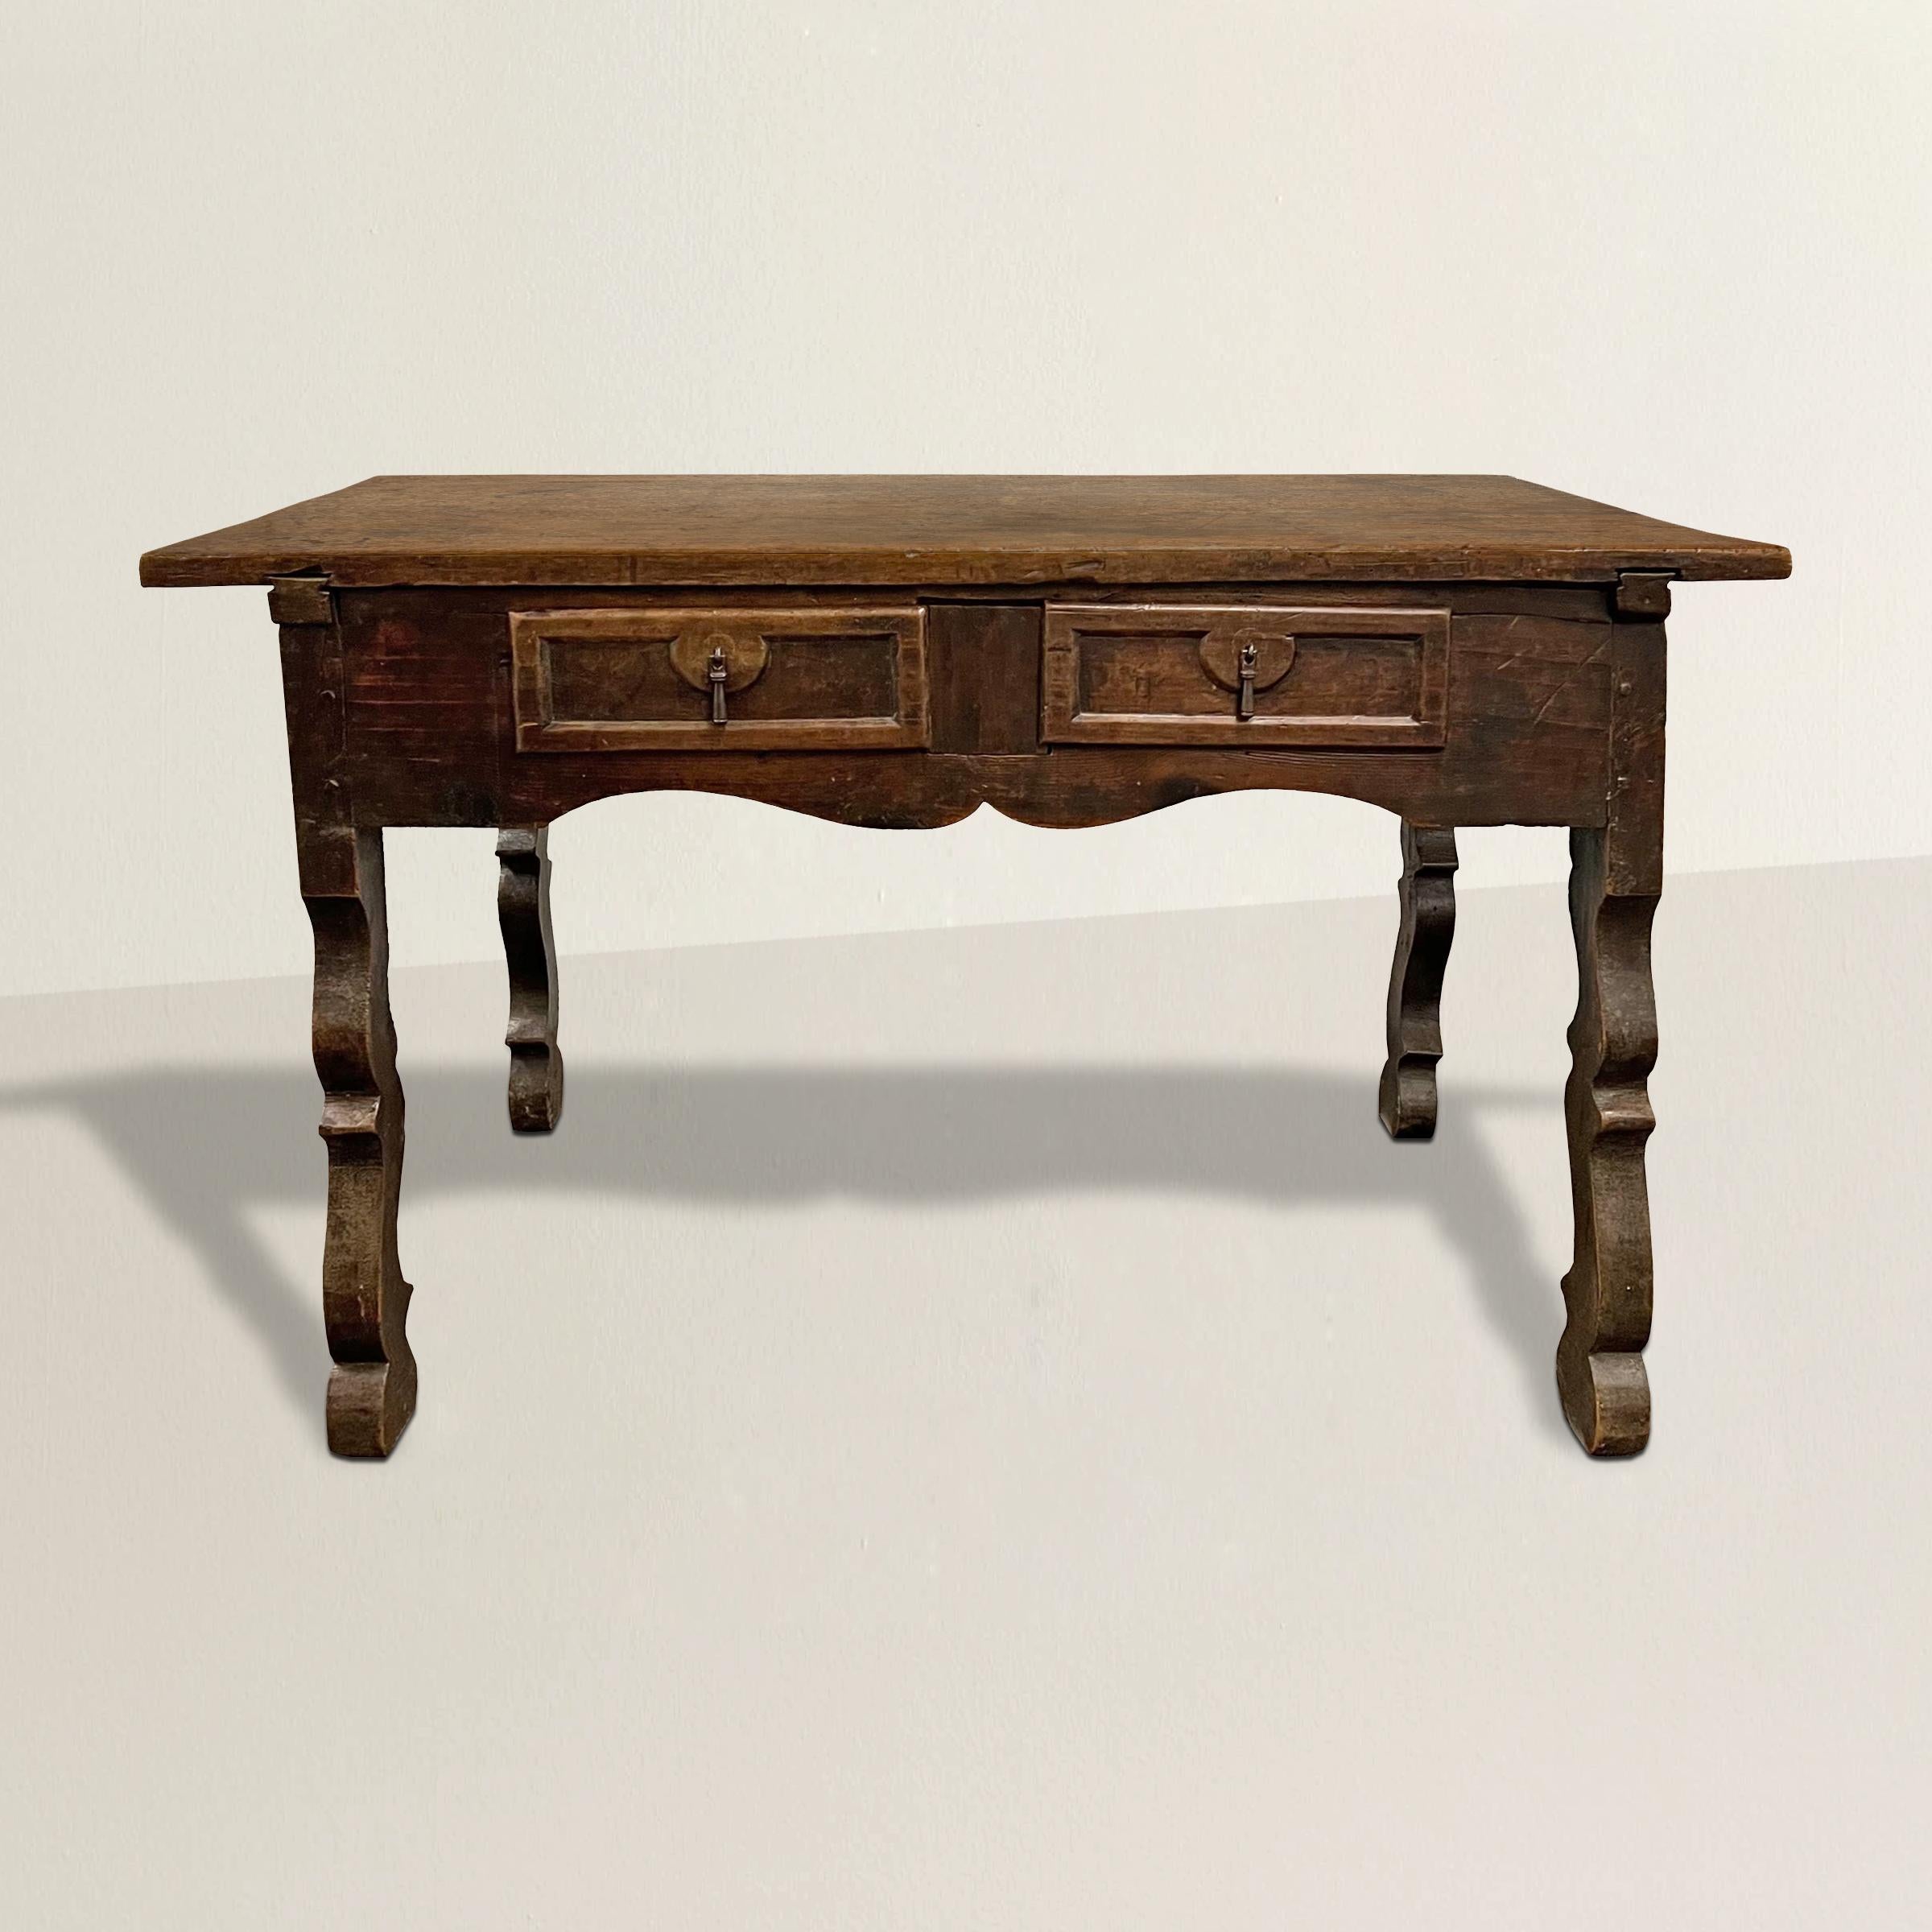 An incredible 17th century Spanish Baroque walnut table with a single walnut slab top over two visible drawers with iron hardware, one hidden drawer, and all resting on silhouetted scrolled legs. Originally a writing table, today it's an amazing